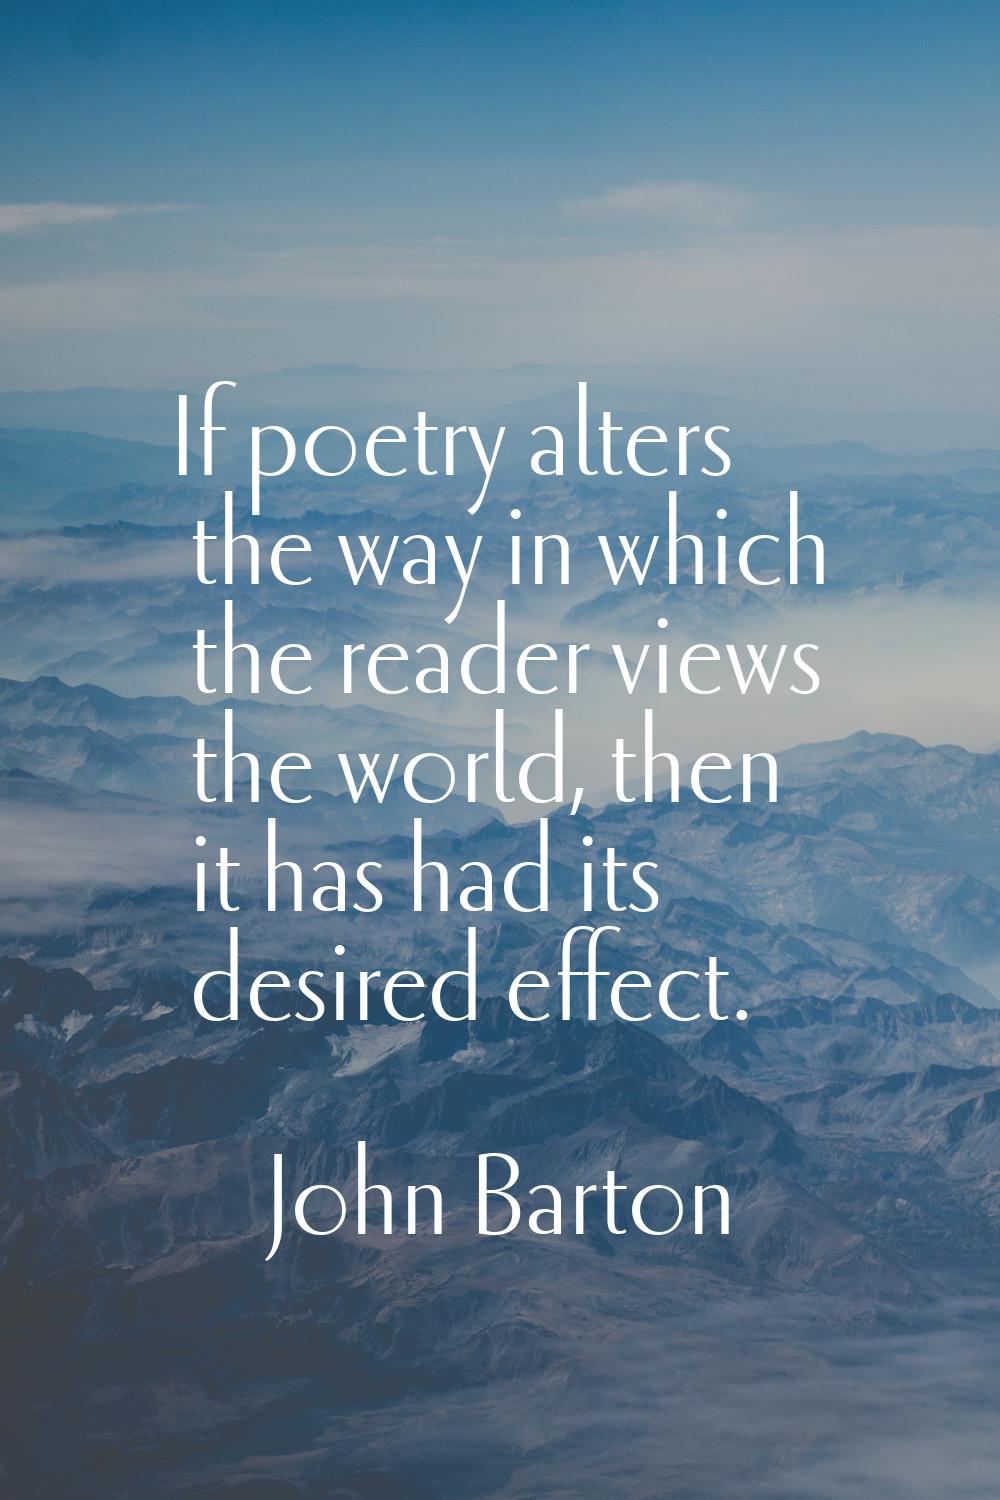 If poetry alters the way in which the reader views the world, then it has had its desired effect.